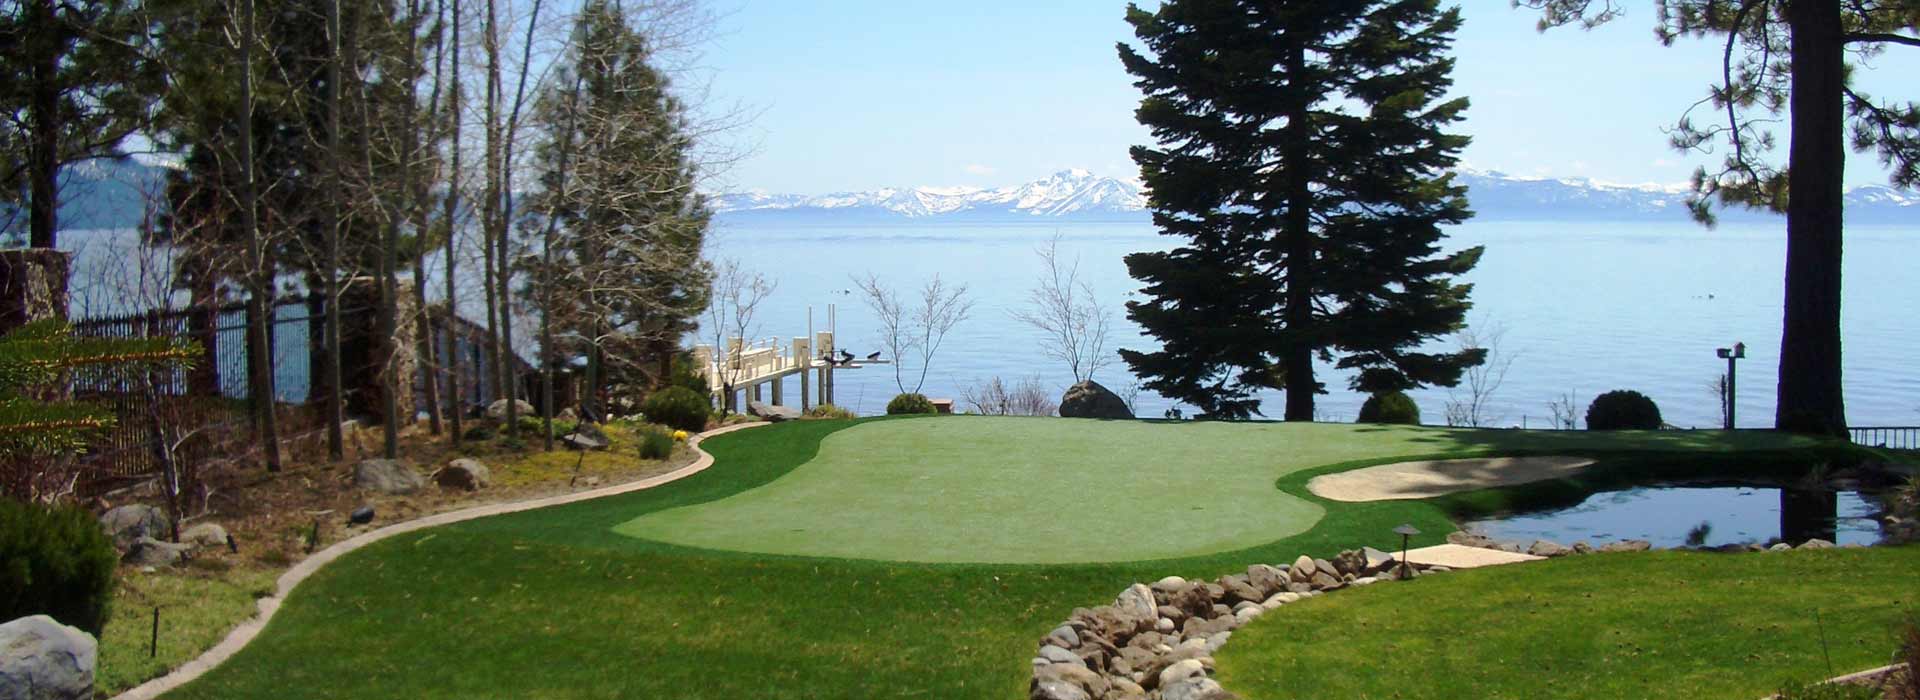 New Mexico lake property putting green